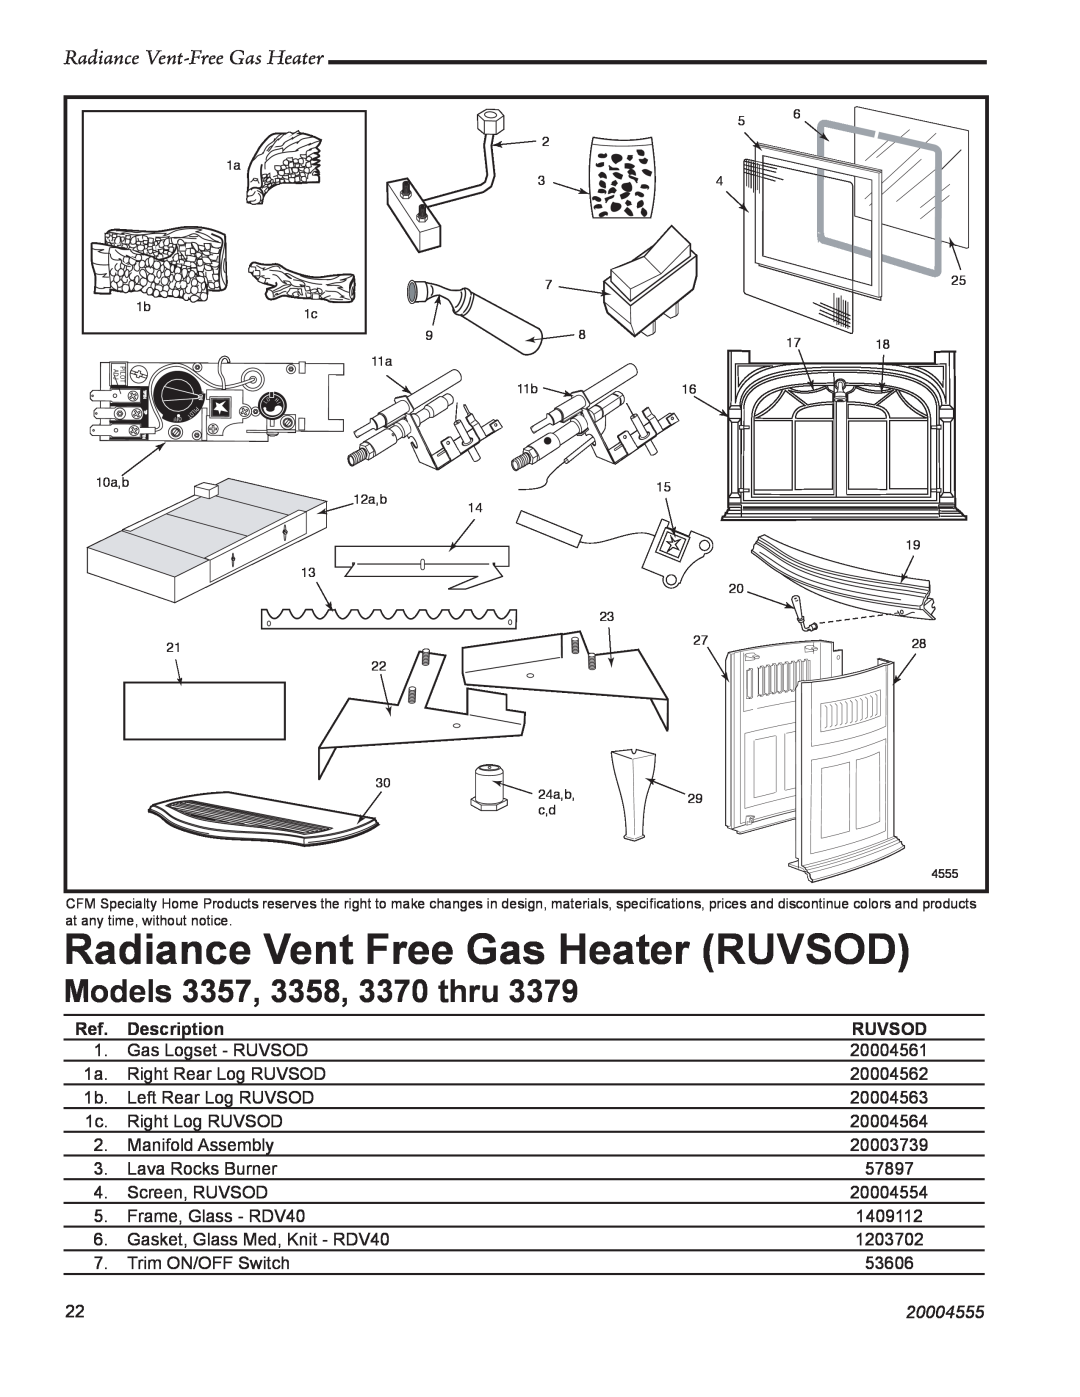 Vermont Casting manual Models 3357, 3358, 3370 thru, Radiance Vent Free Gas Heater RUVSOD, Radiance Vent-FreeGas Heater 